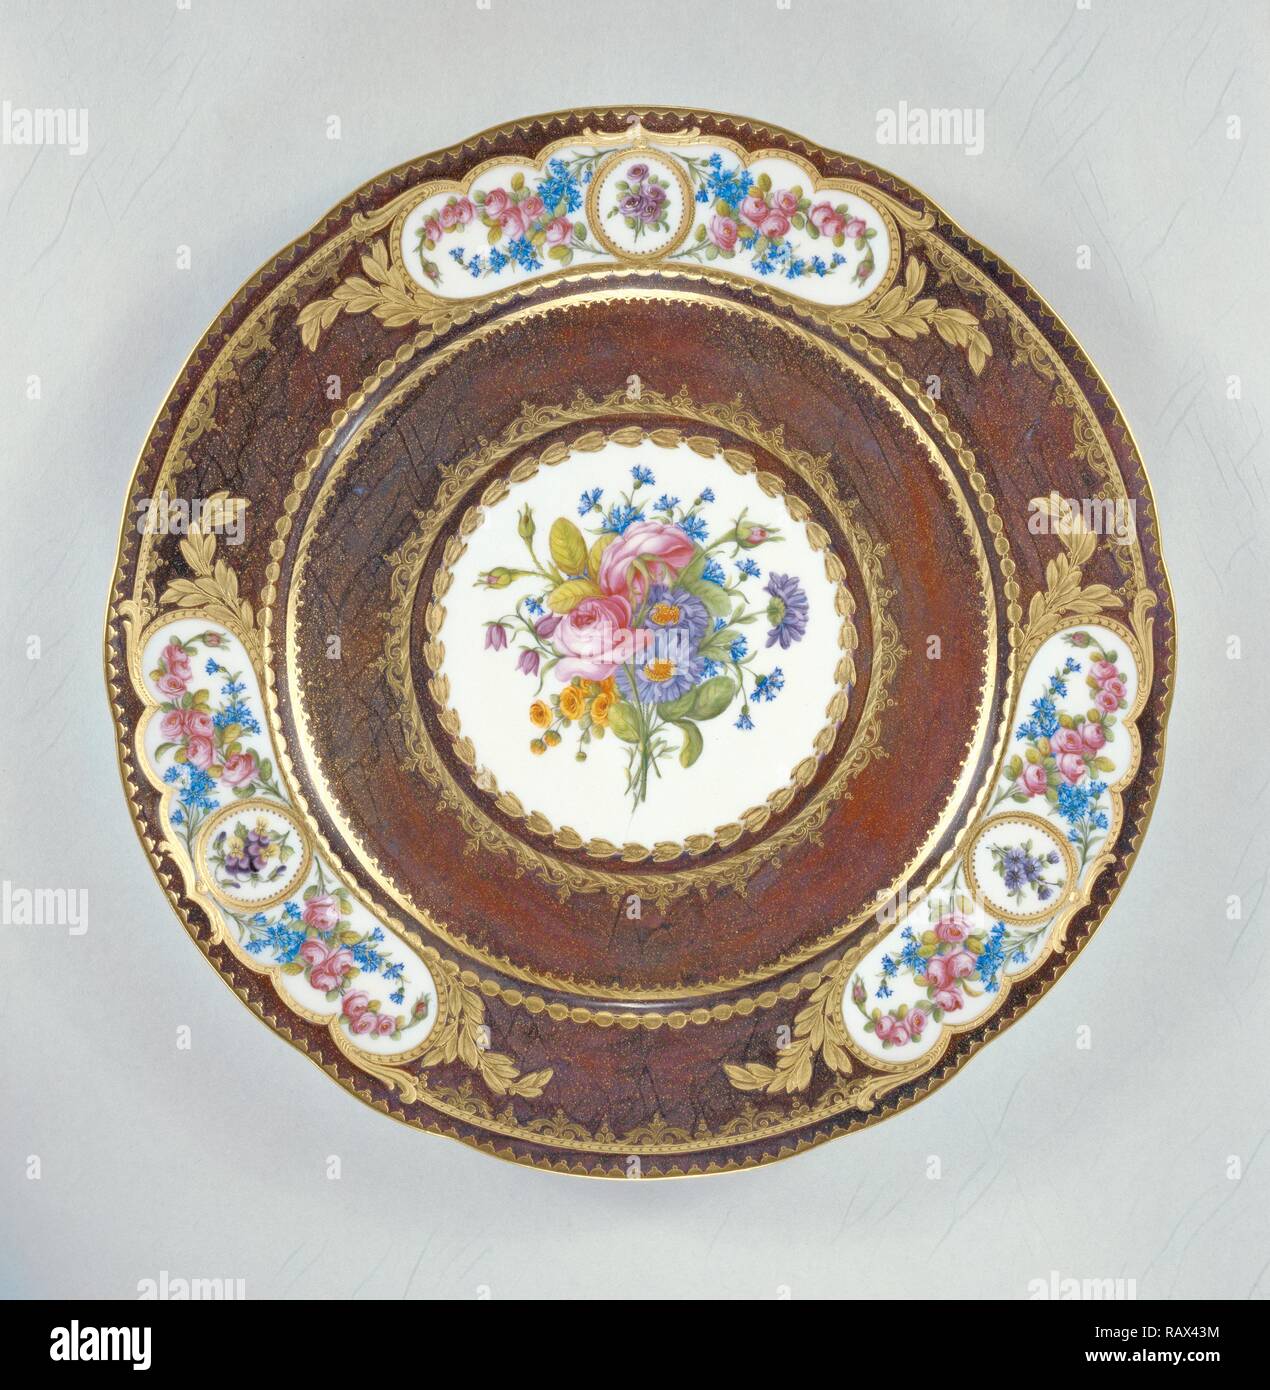 Plate (assiette d'echantillons), Ground color painted by Antoine Capelle, French, active 1745 - 1800, Flowers painted reimagined Stock Photo